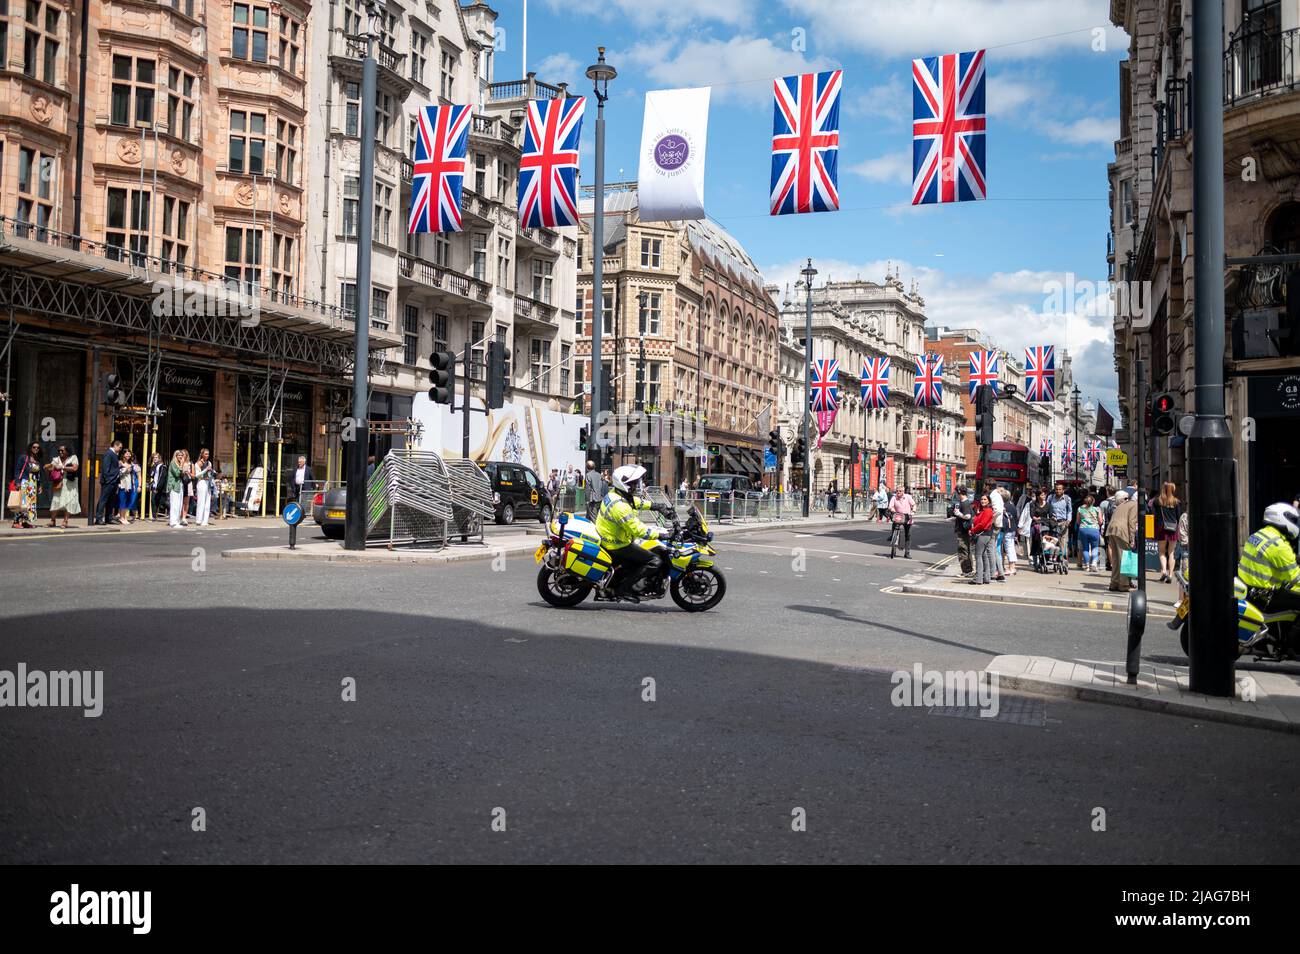 Police motorcycles at London jubilee 2022 with union jack flags above iconic street sunny day Stock Photo